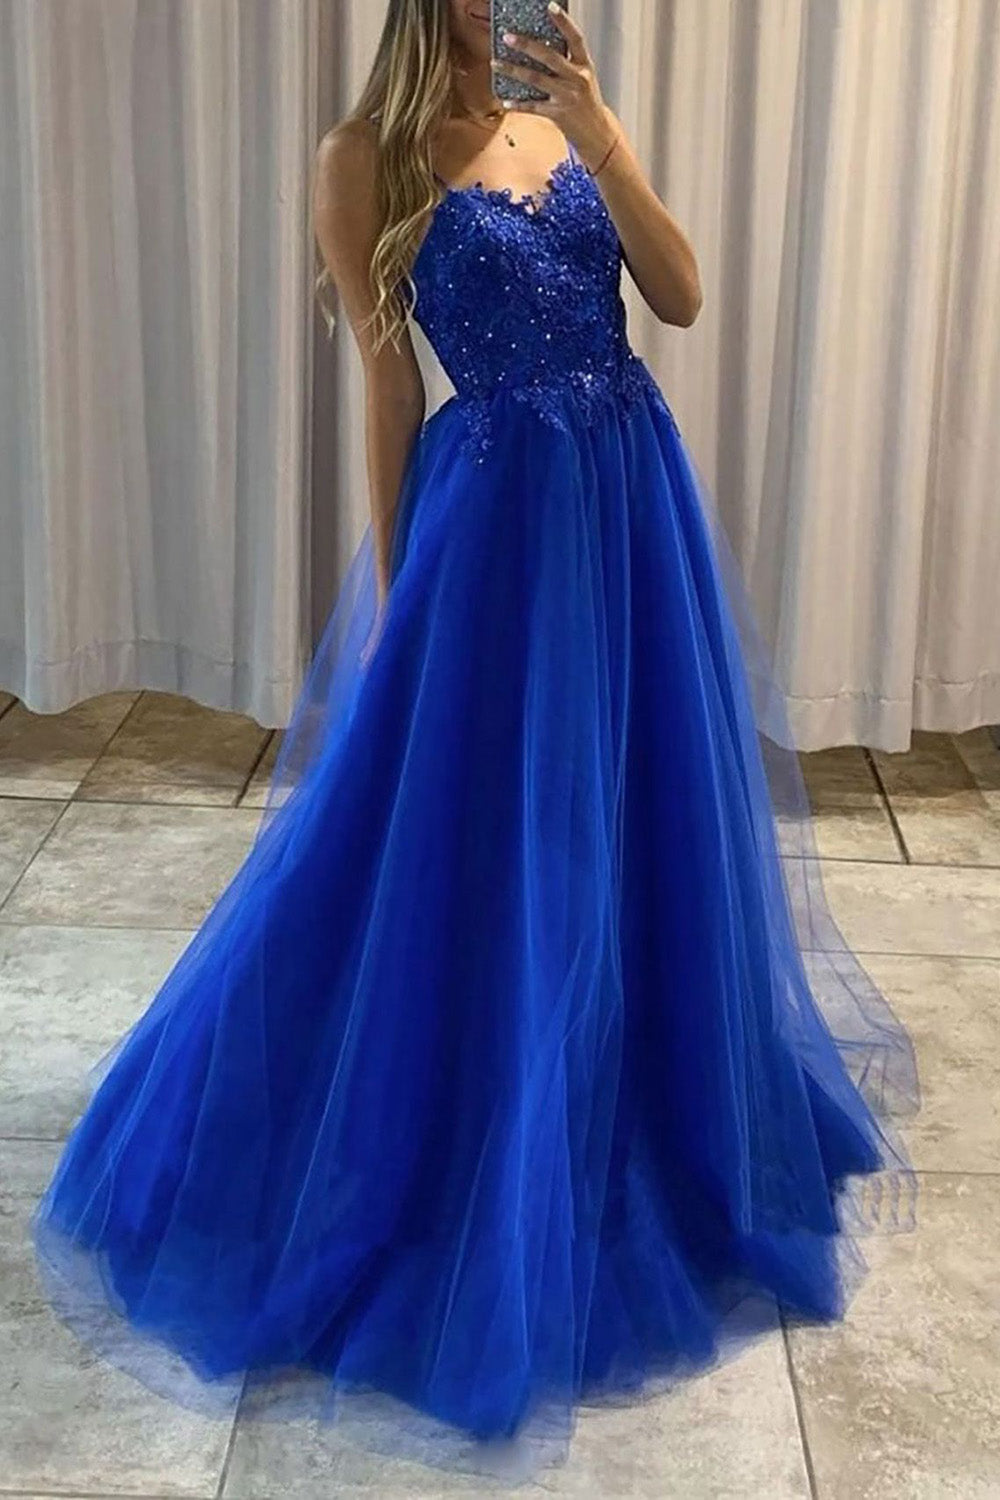 A-Line Spaghetti Straps Royal Blue Long Prom Dress with Beading